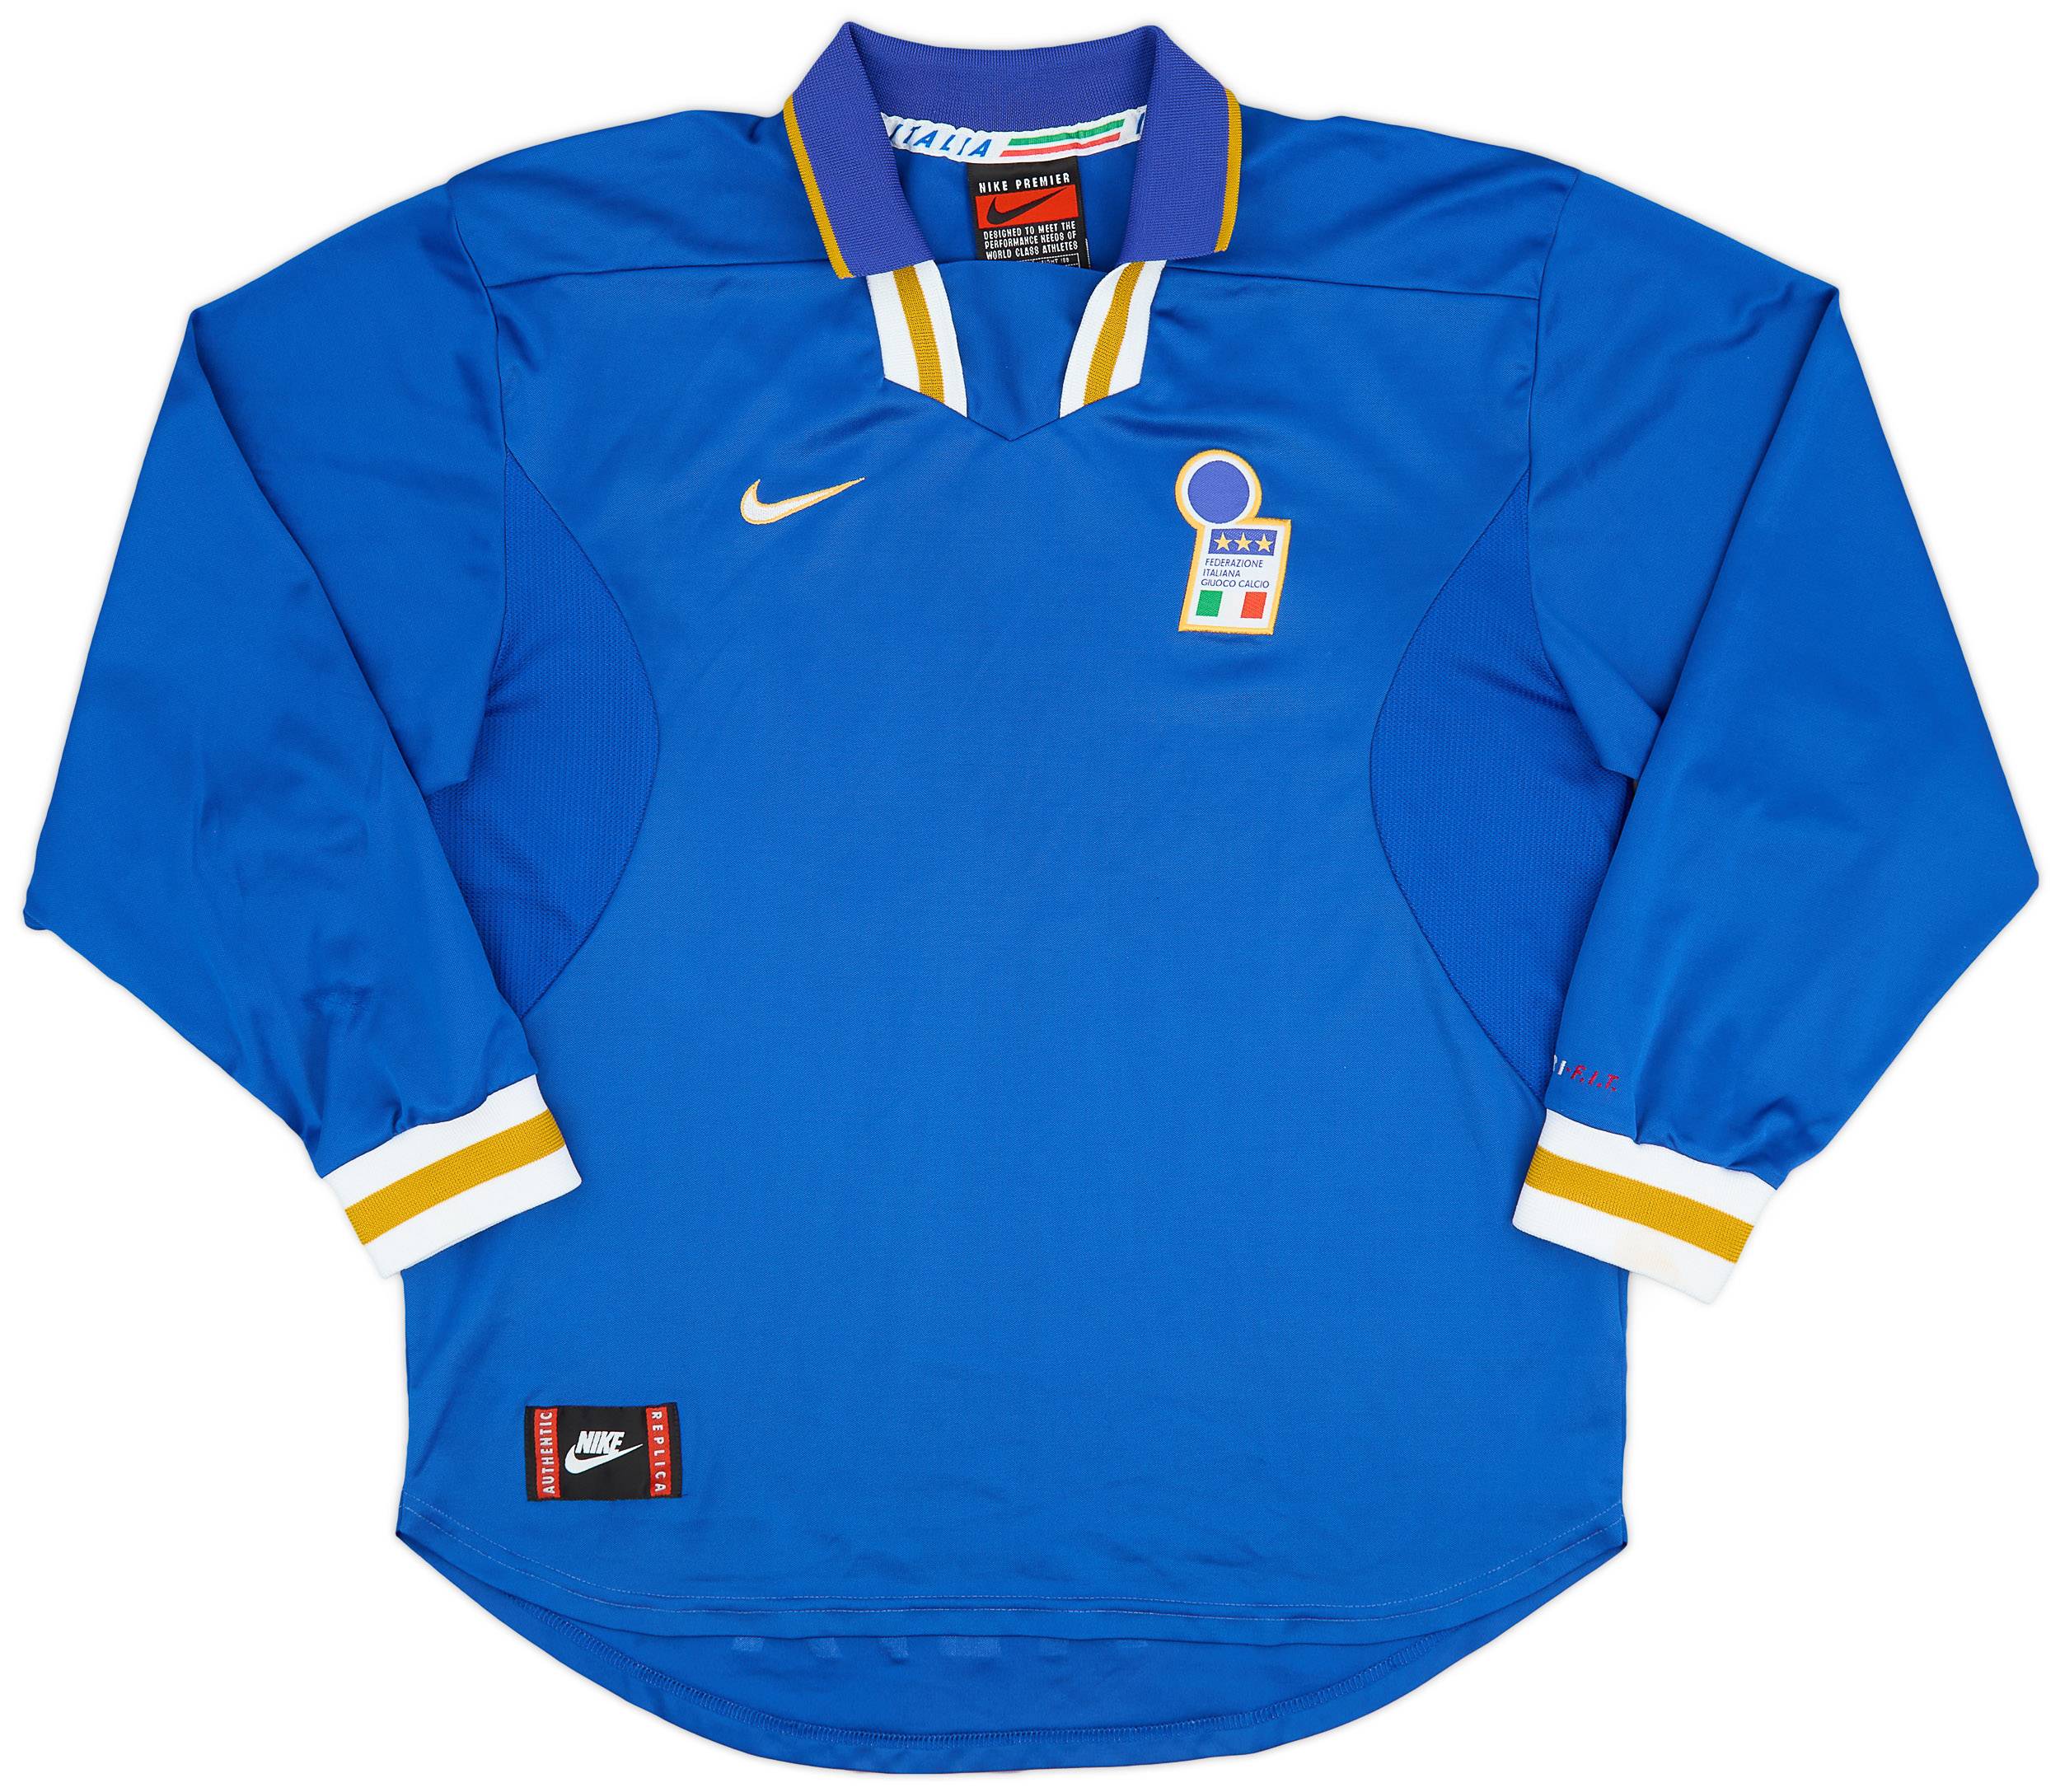 1996-97 Italy Home L/S Shirt - 8/10 - (XL)